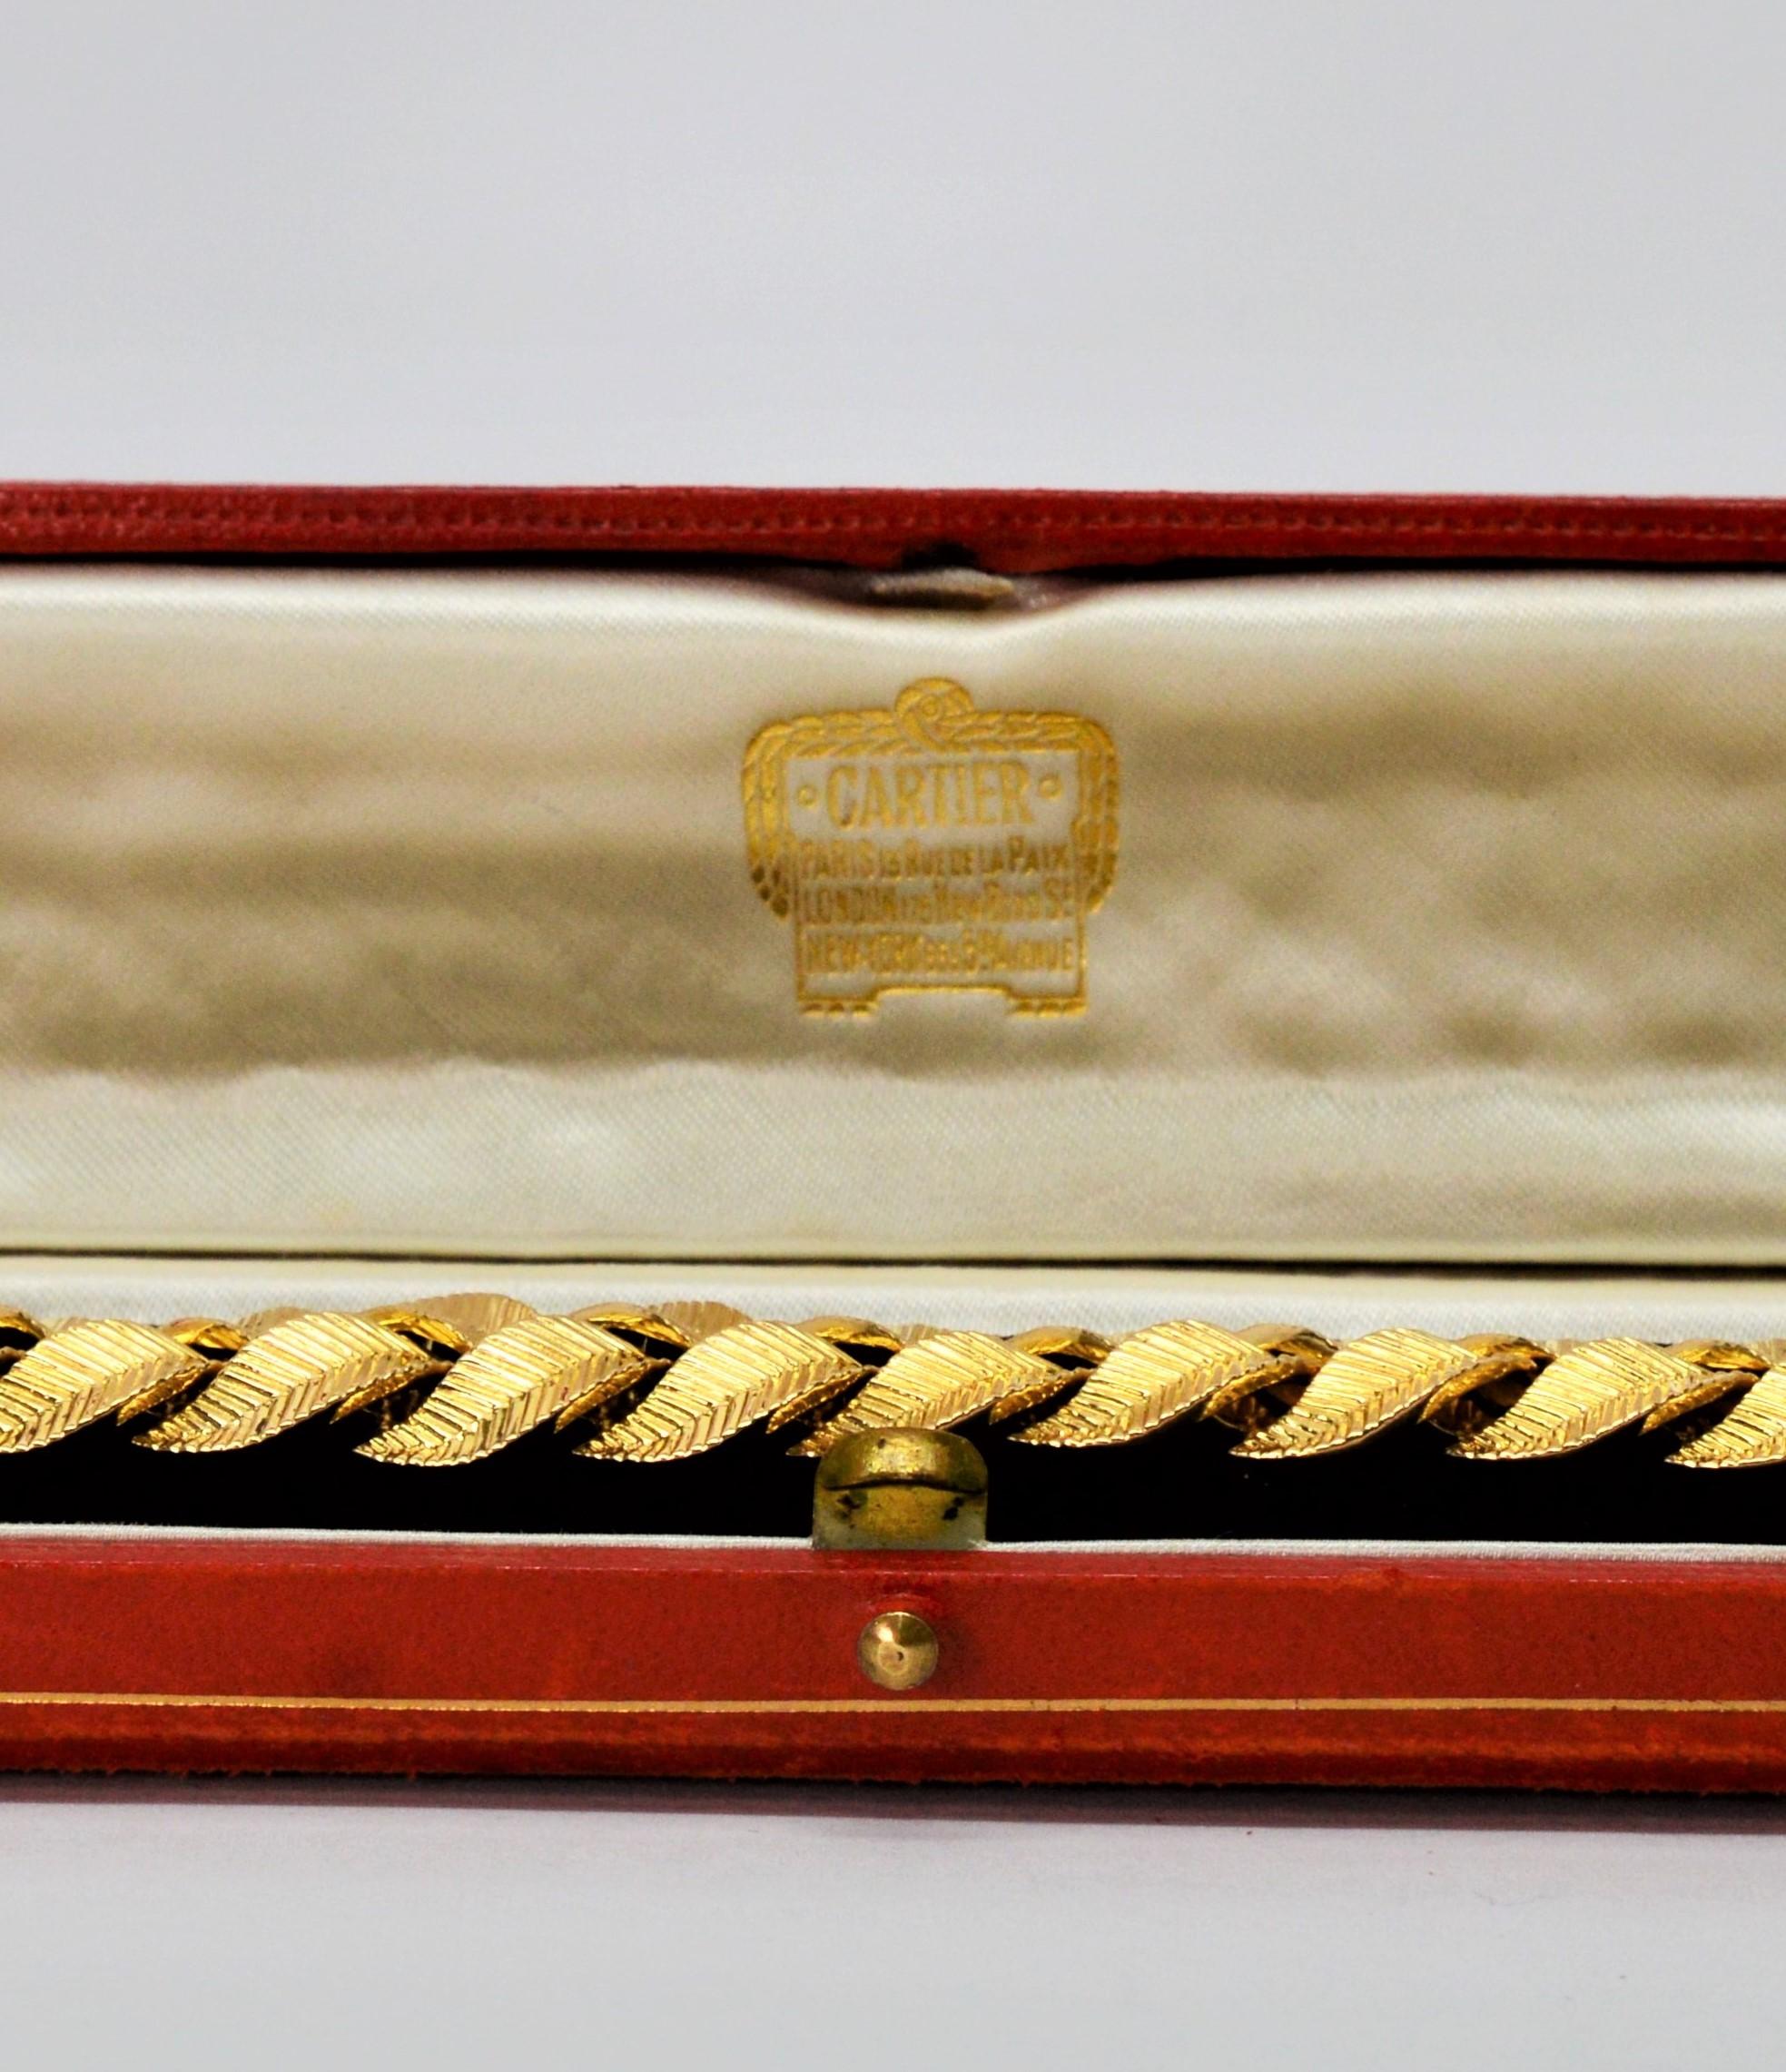 Cartier 18 Karat Yellow Gold Braided Leaf Bracelet In Excellent Condition For Sale In Mount Kisco, NY